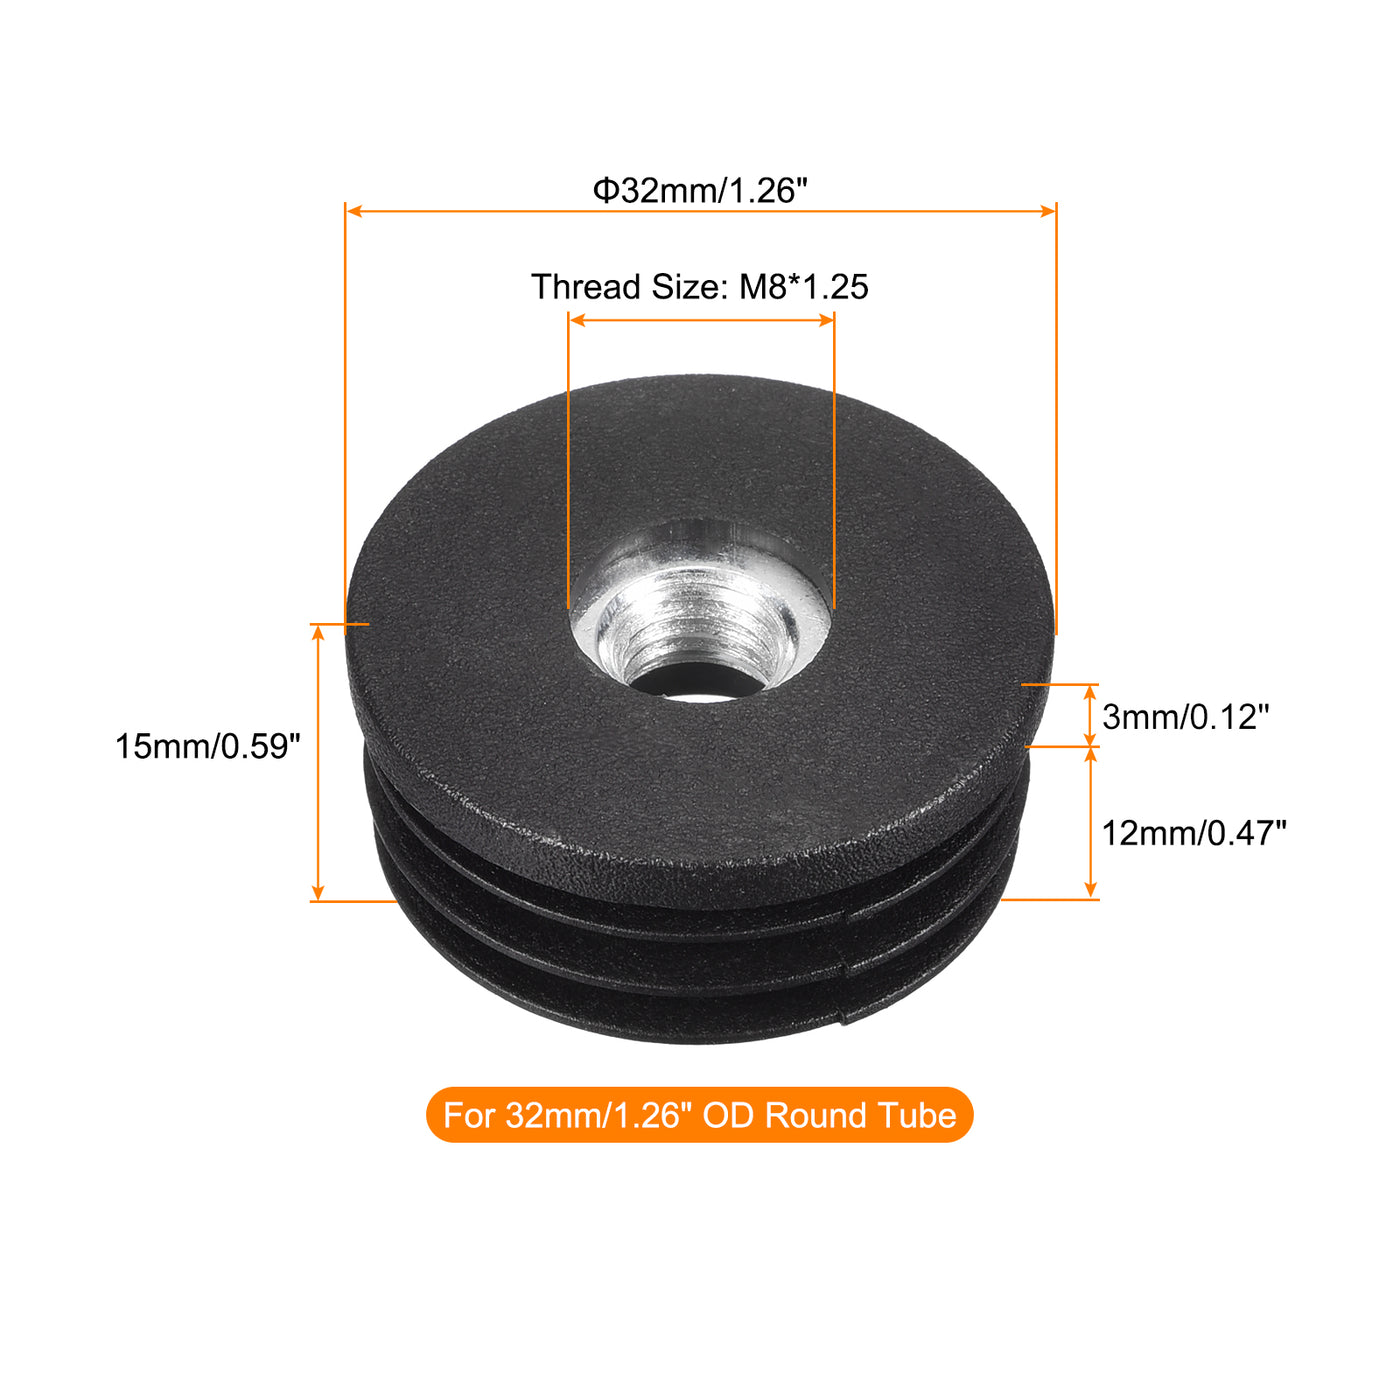 uxcell Uxcell 8Pcs 32mm/1.26" Caster Insert with Thread, Round M8 Thread for Furniture